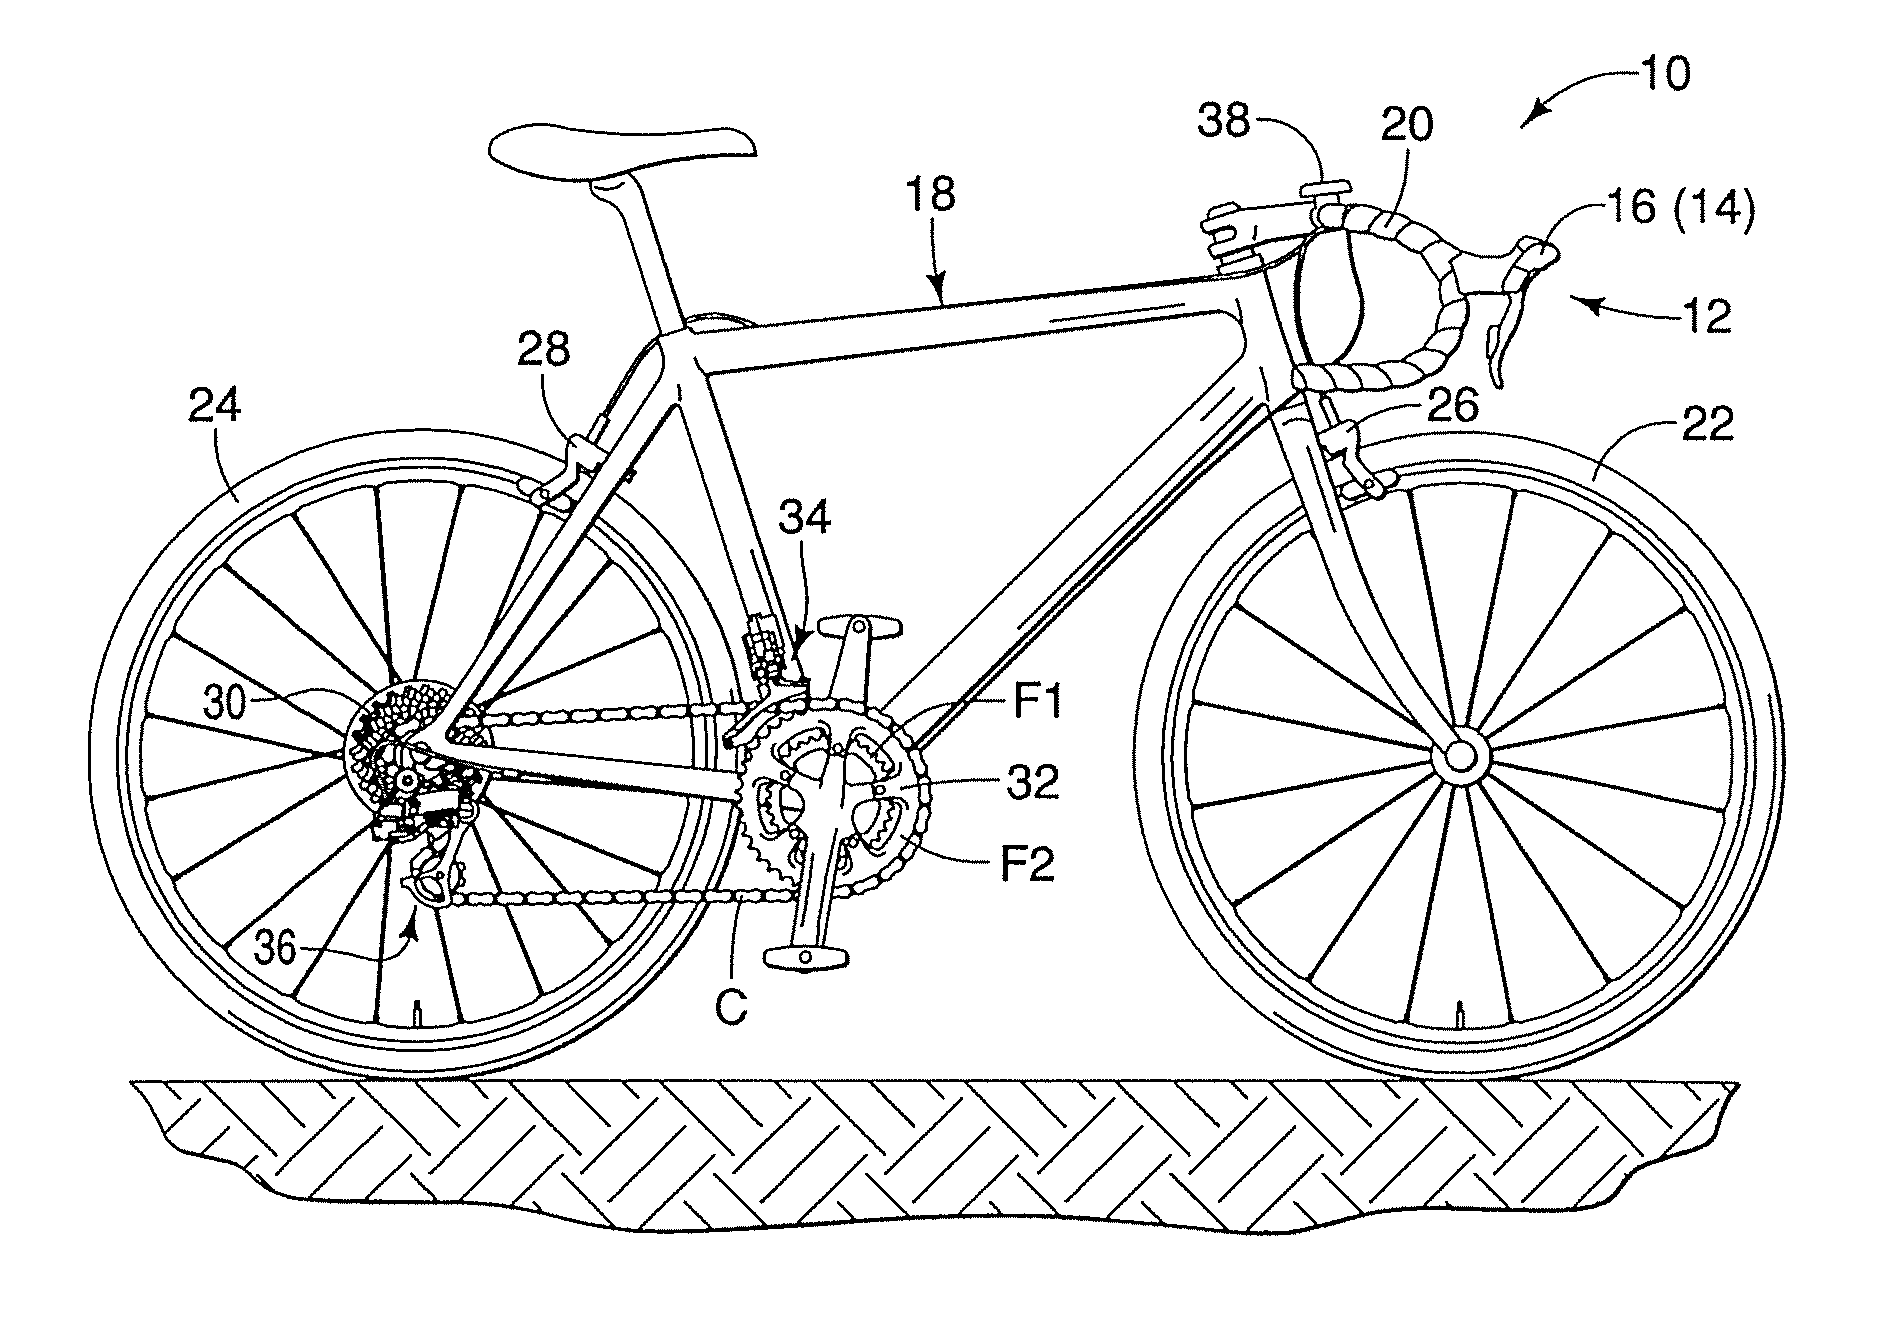 Bicycle control system having a value generating unit